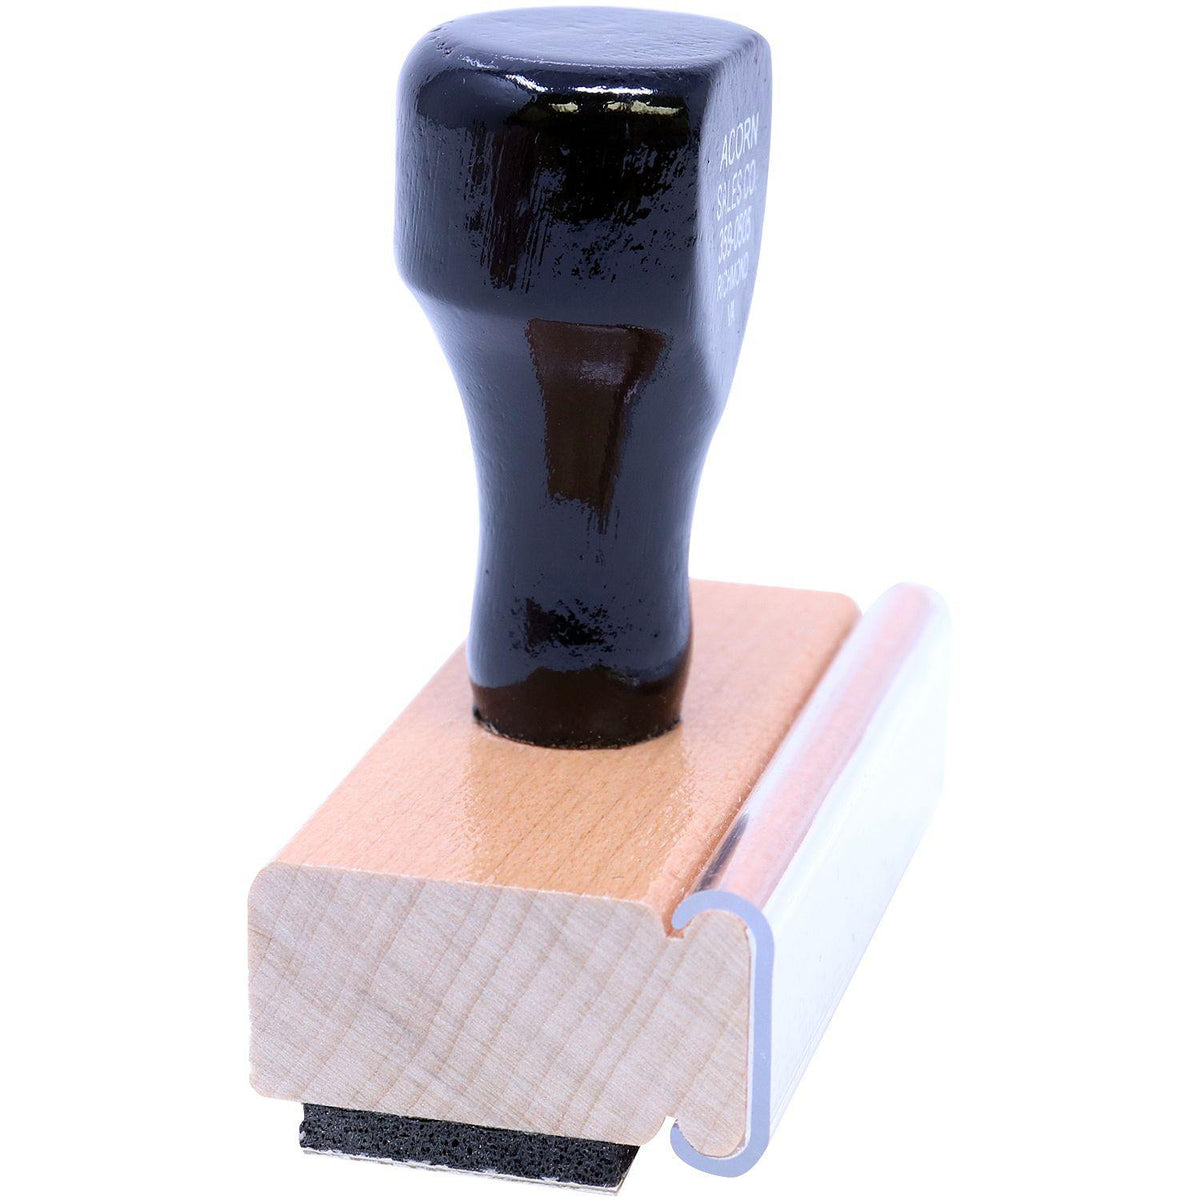 Side View of Large Received with In Box Rubber Stamp at an Angle